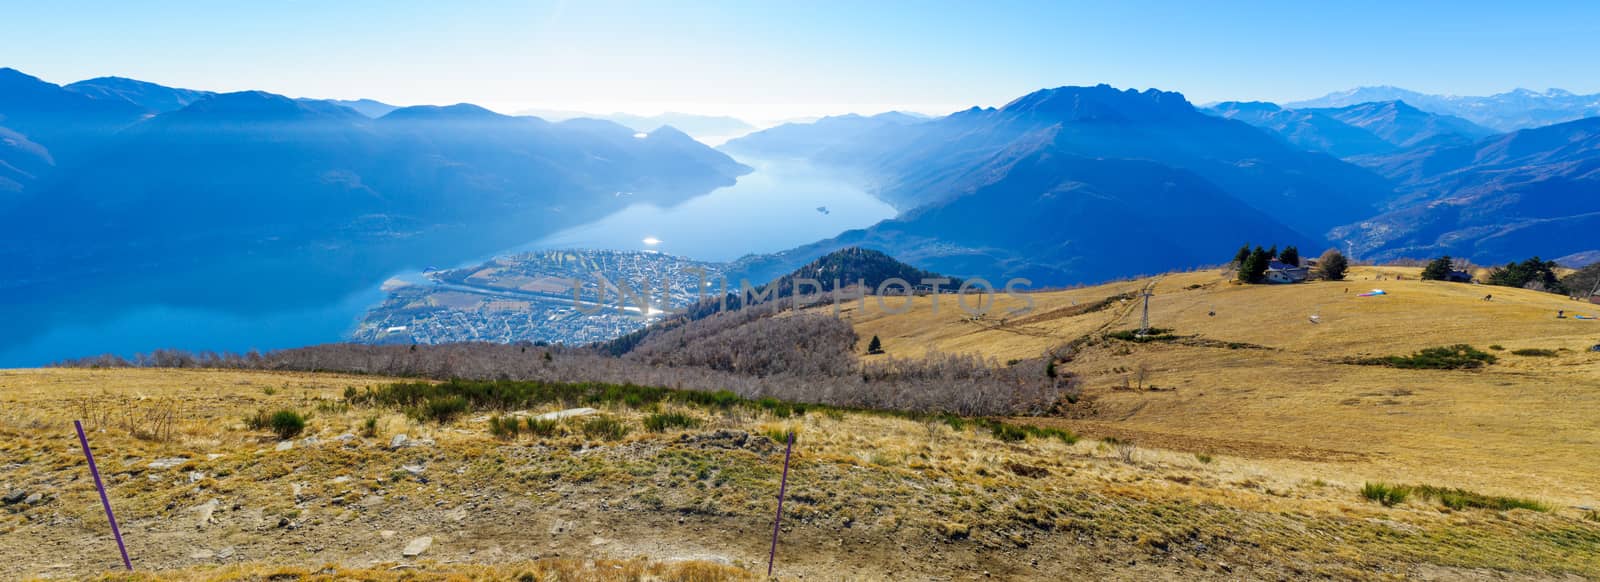 Panoramic view of Locarno and Lake Maggiore from the Cardada-Cimetta mountain range, with a chairlift and a paraglider. Ticino canton, Switzerland